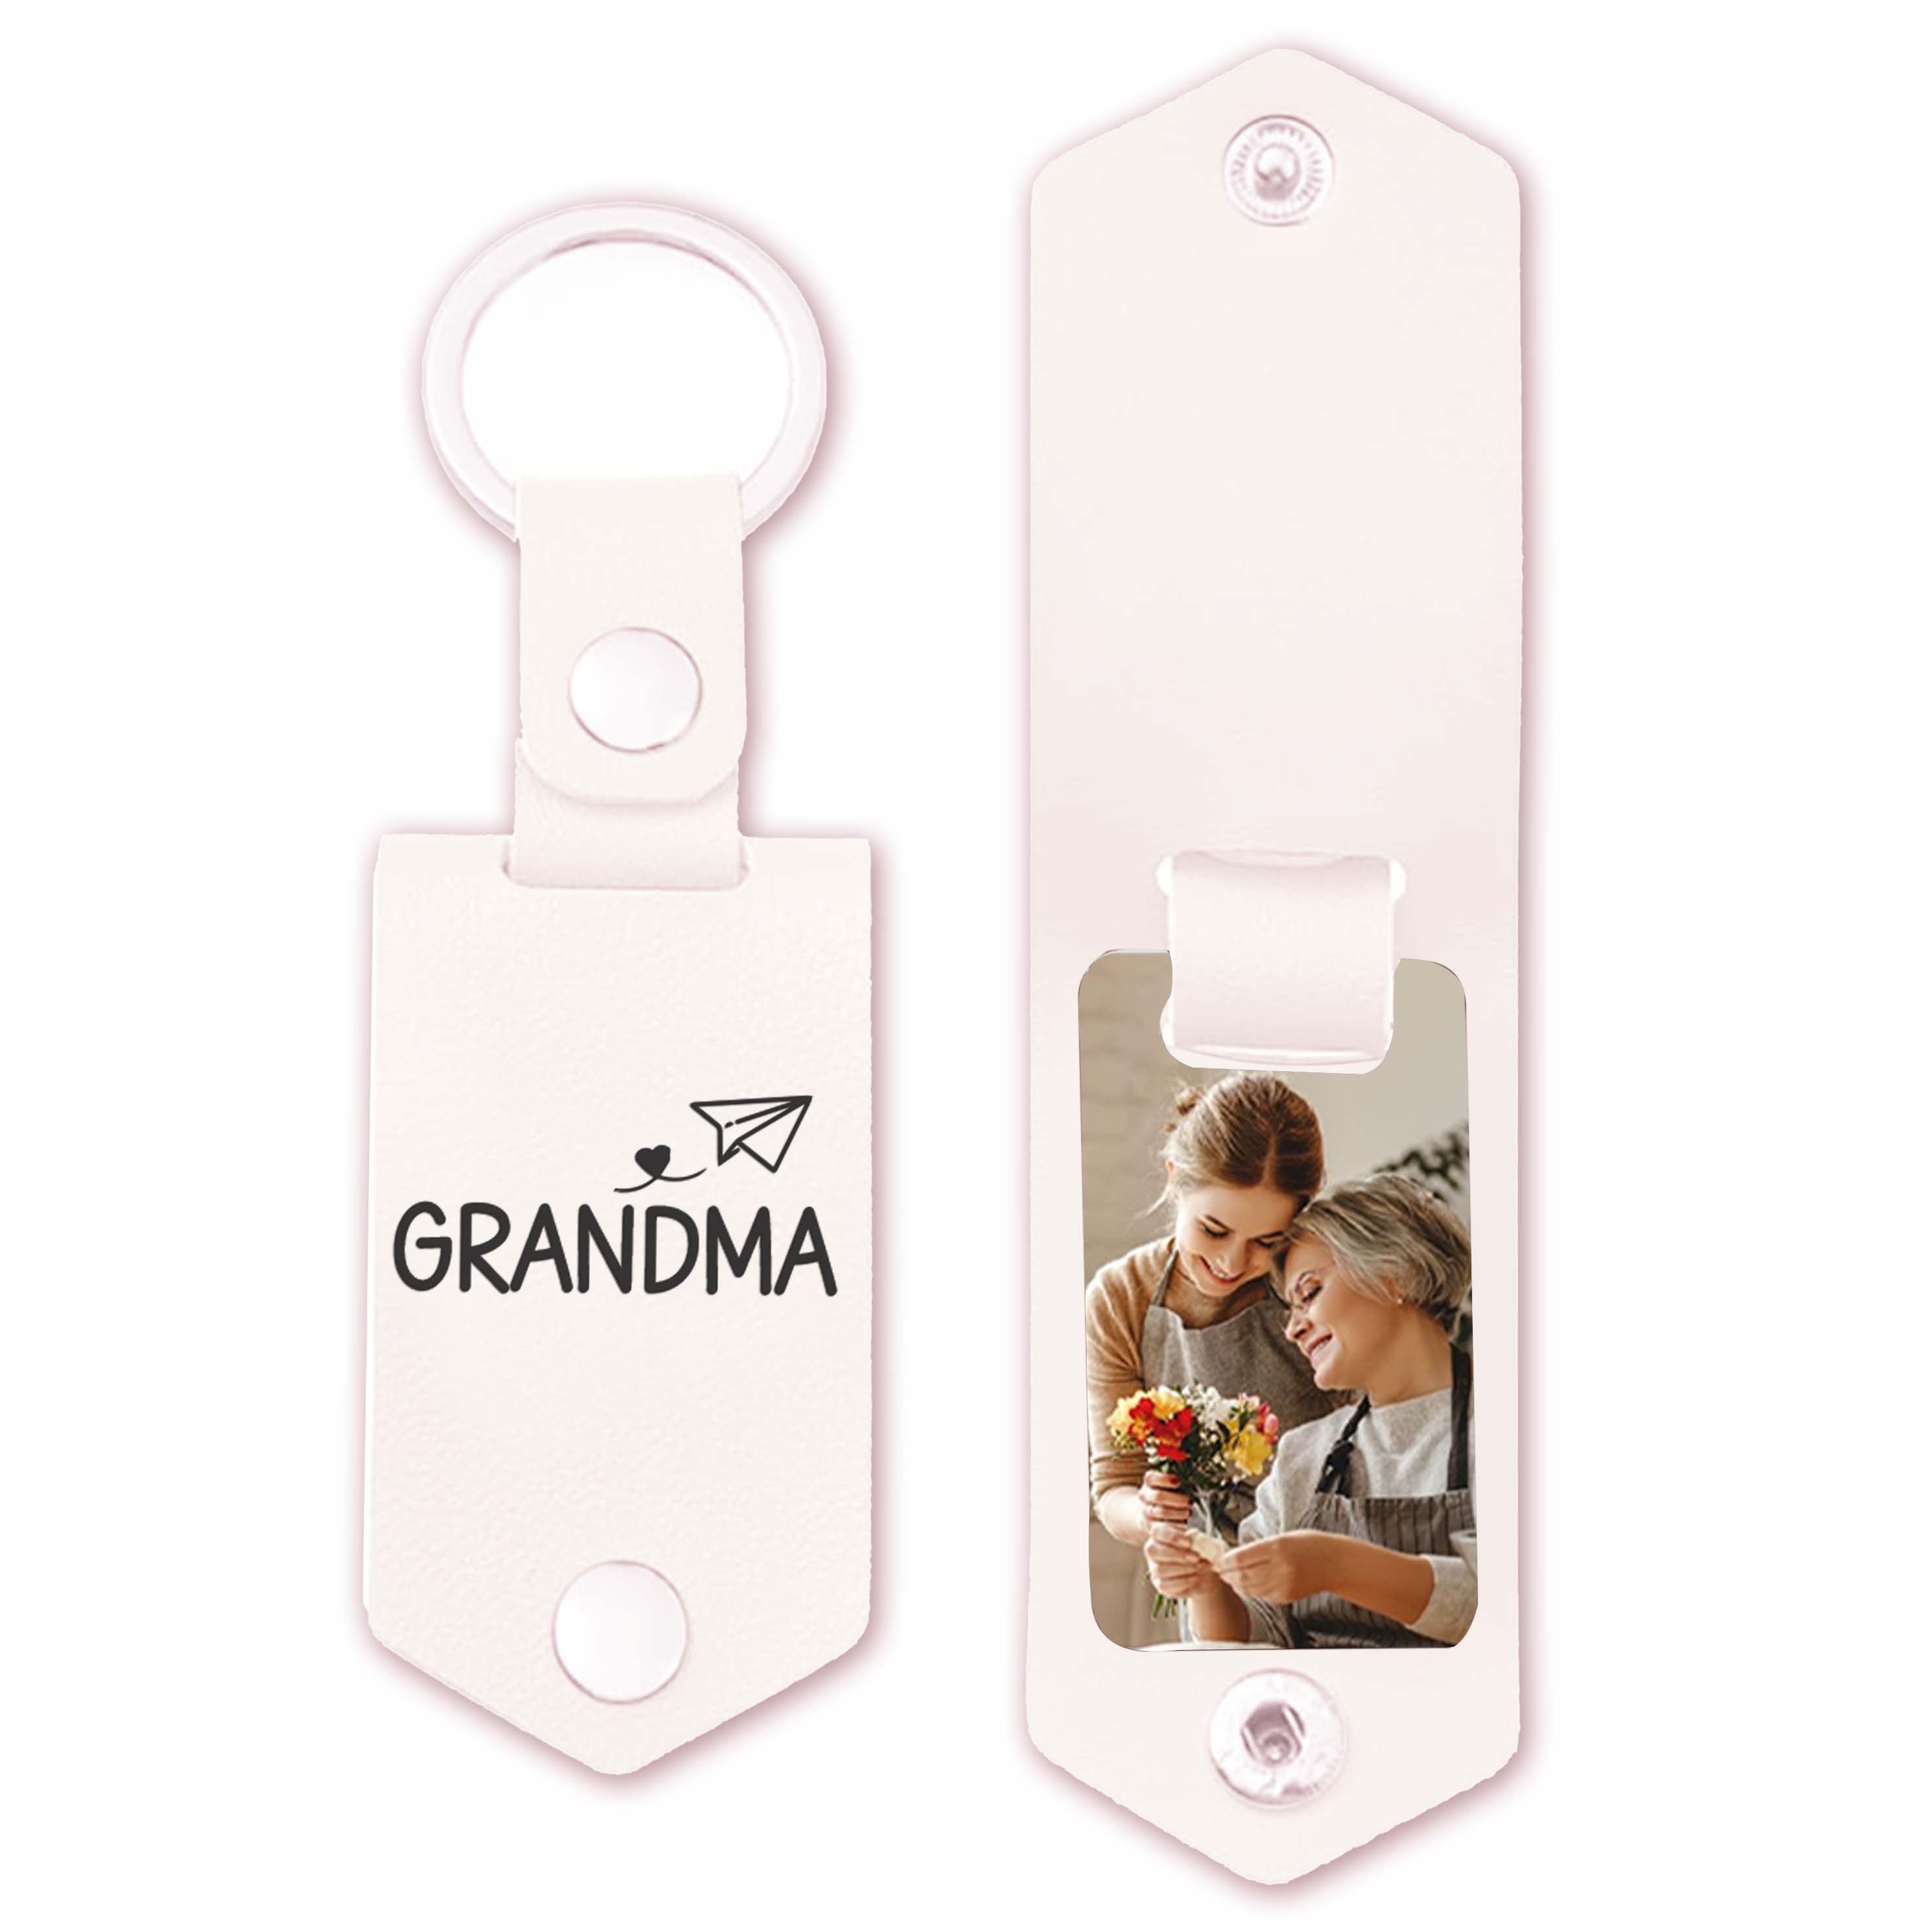 Grandma Picture Gifts